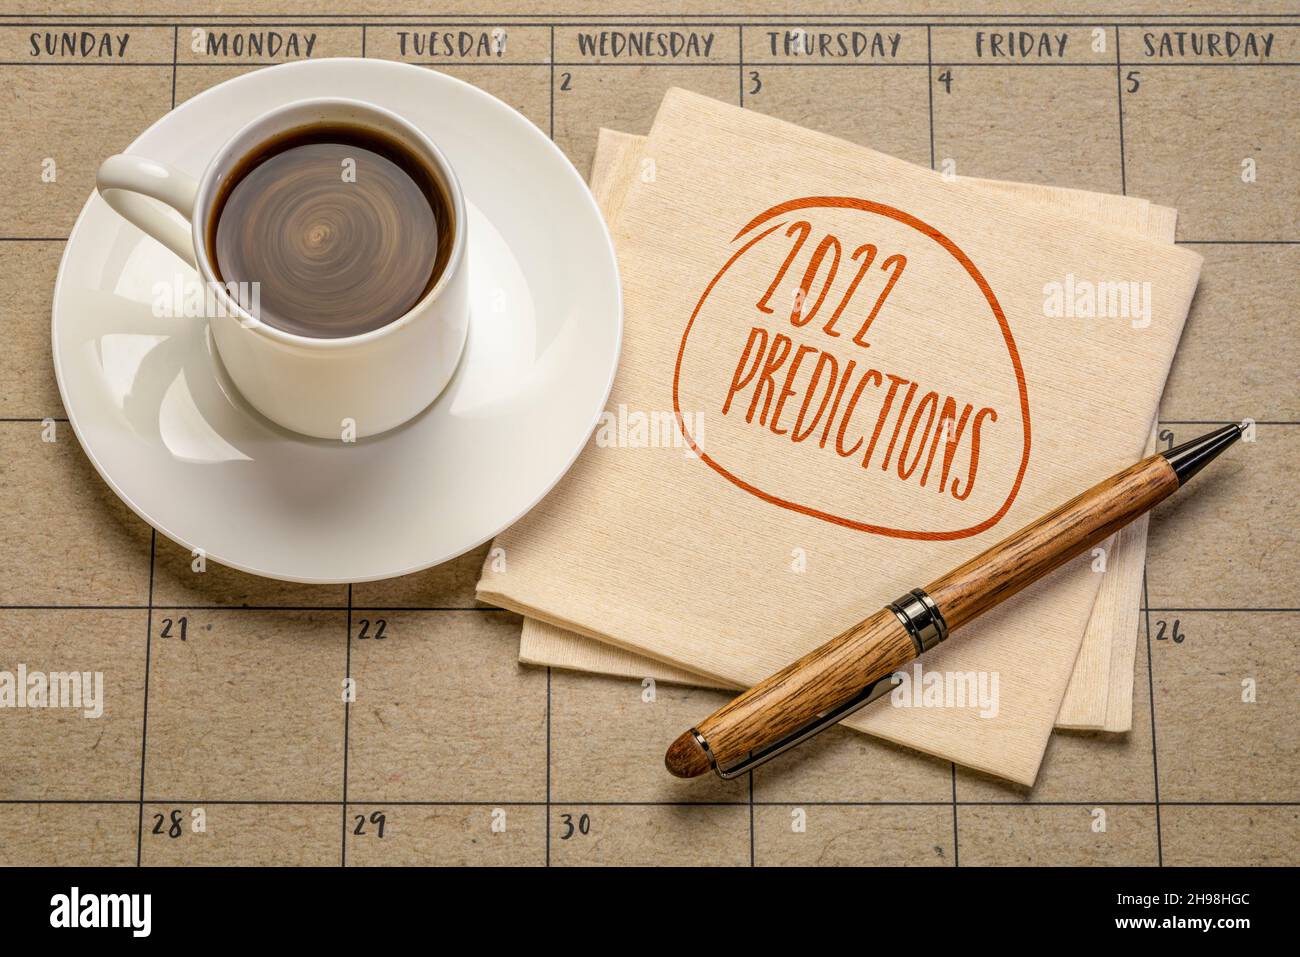 2022 predictions - handwriting on a napkin with a cup of coffee, business and financial trends and expectations in New Year Stock Photo